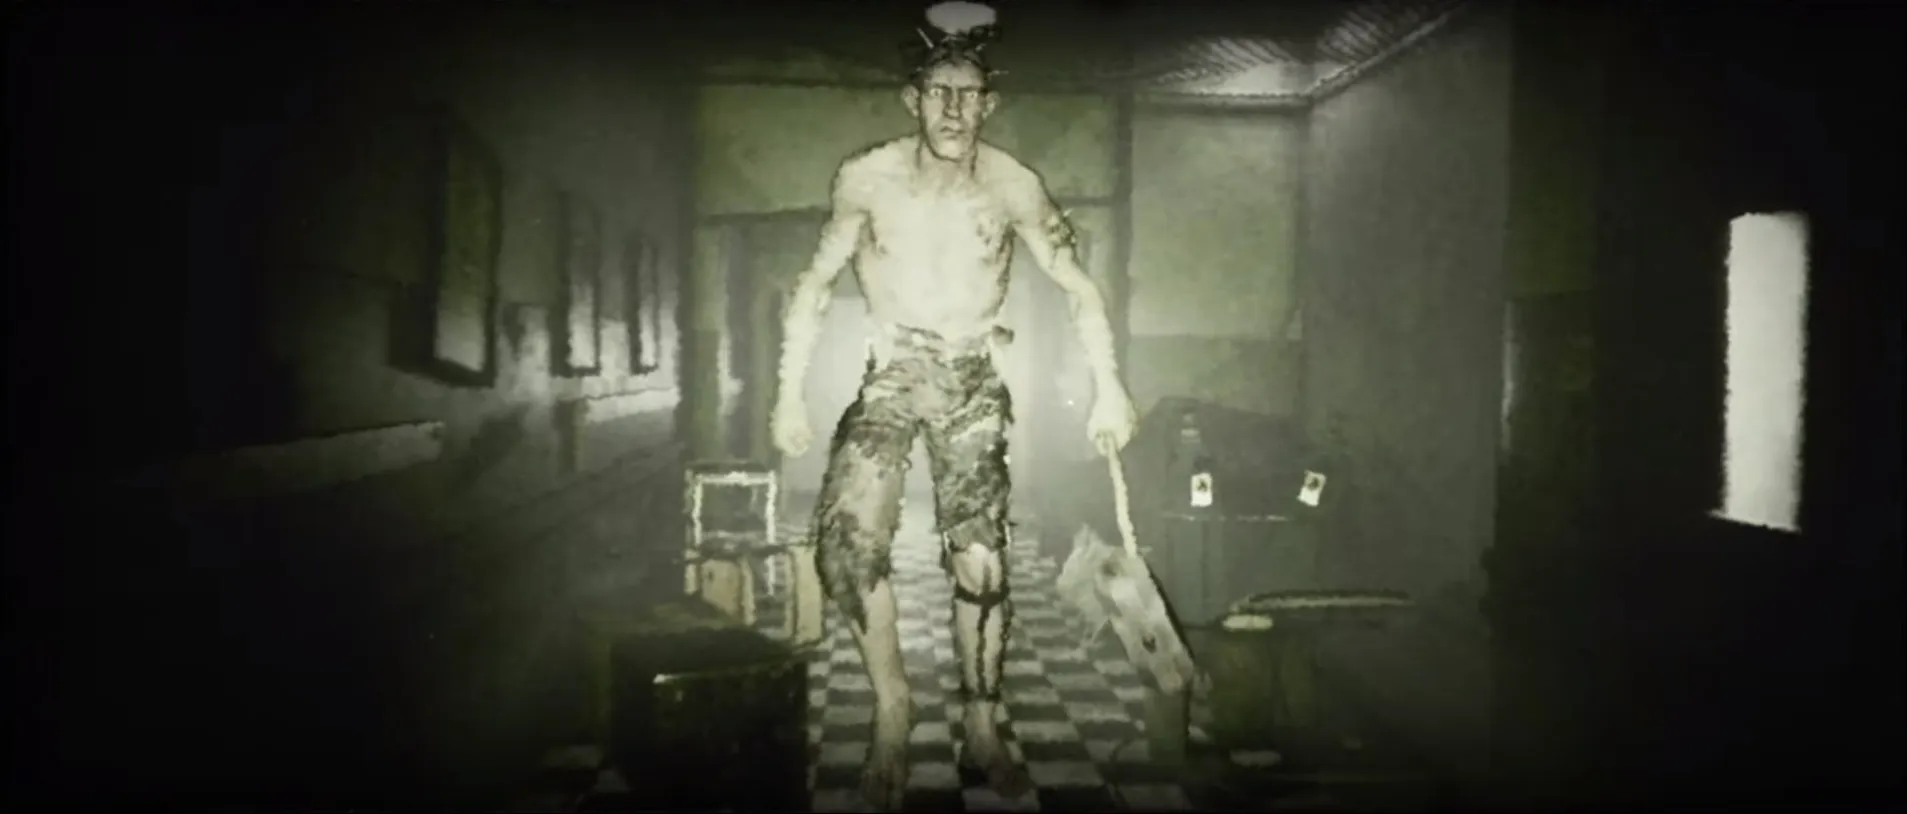 The Outlast Trials properly revealed, showing horrifying co-op gameplay 